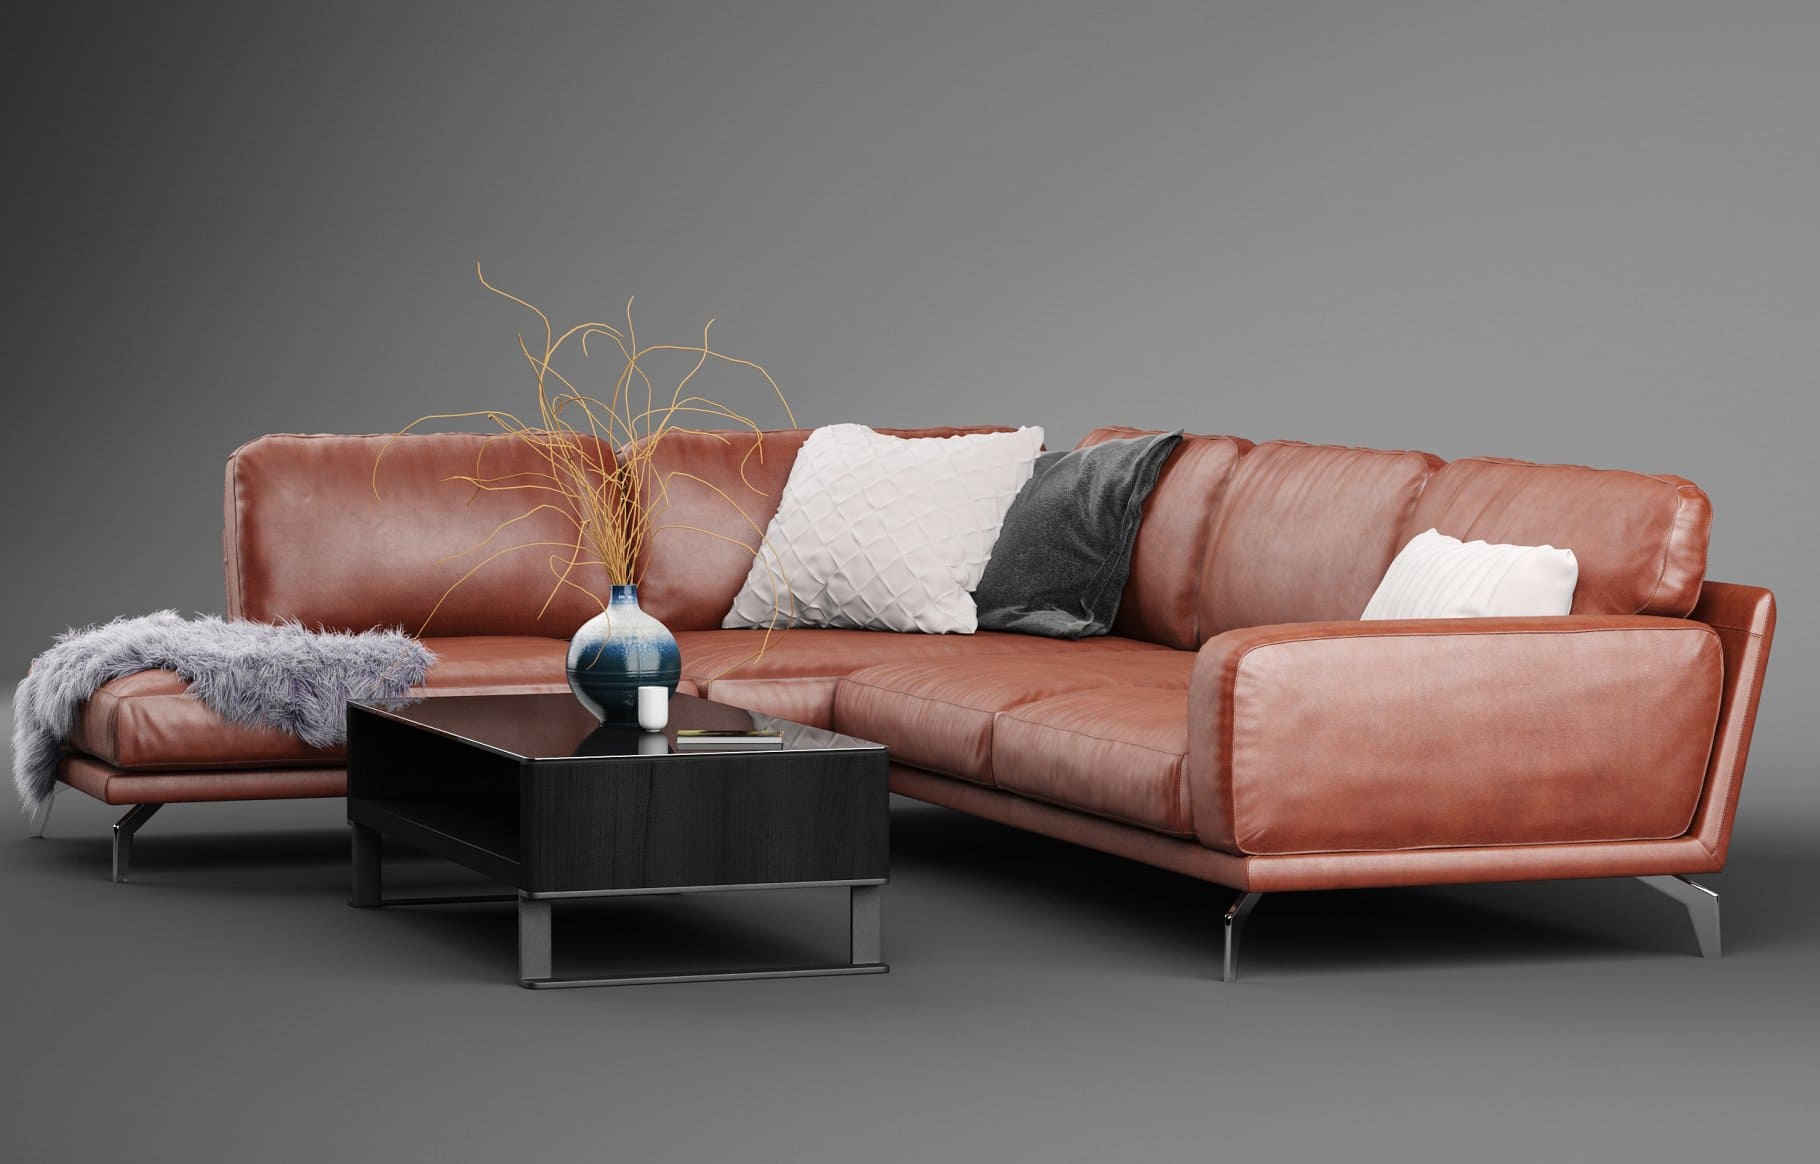 A leather sofa and a coffee table with a white and blue vase are depicted on a gray background.